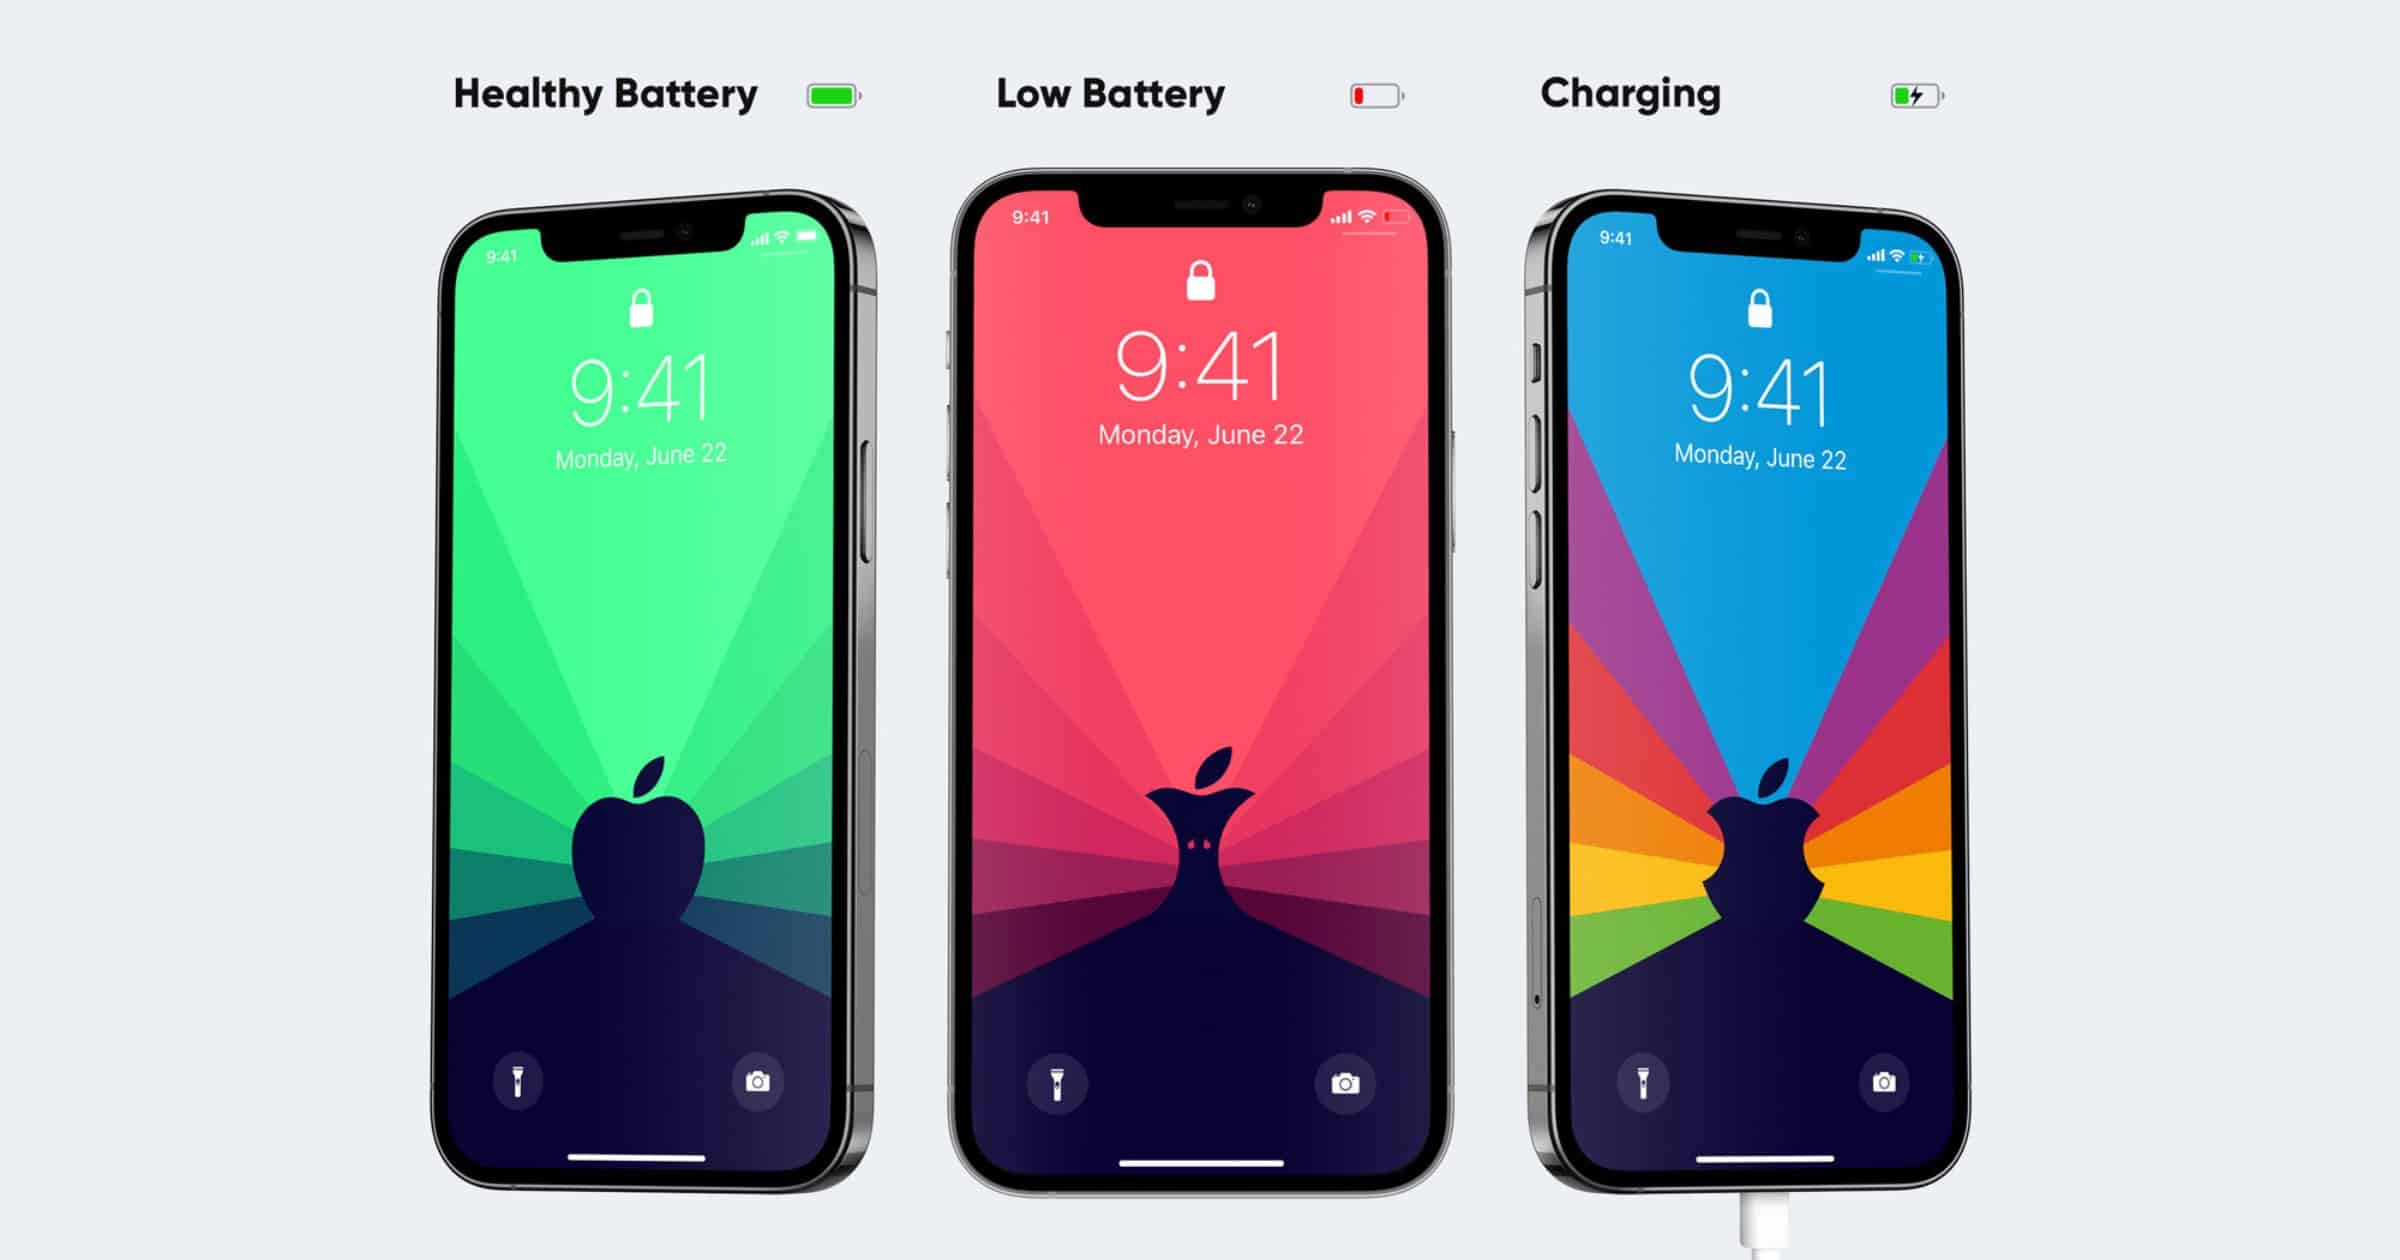 These Dynamic iOS Wallpapers Change